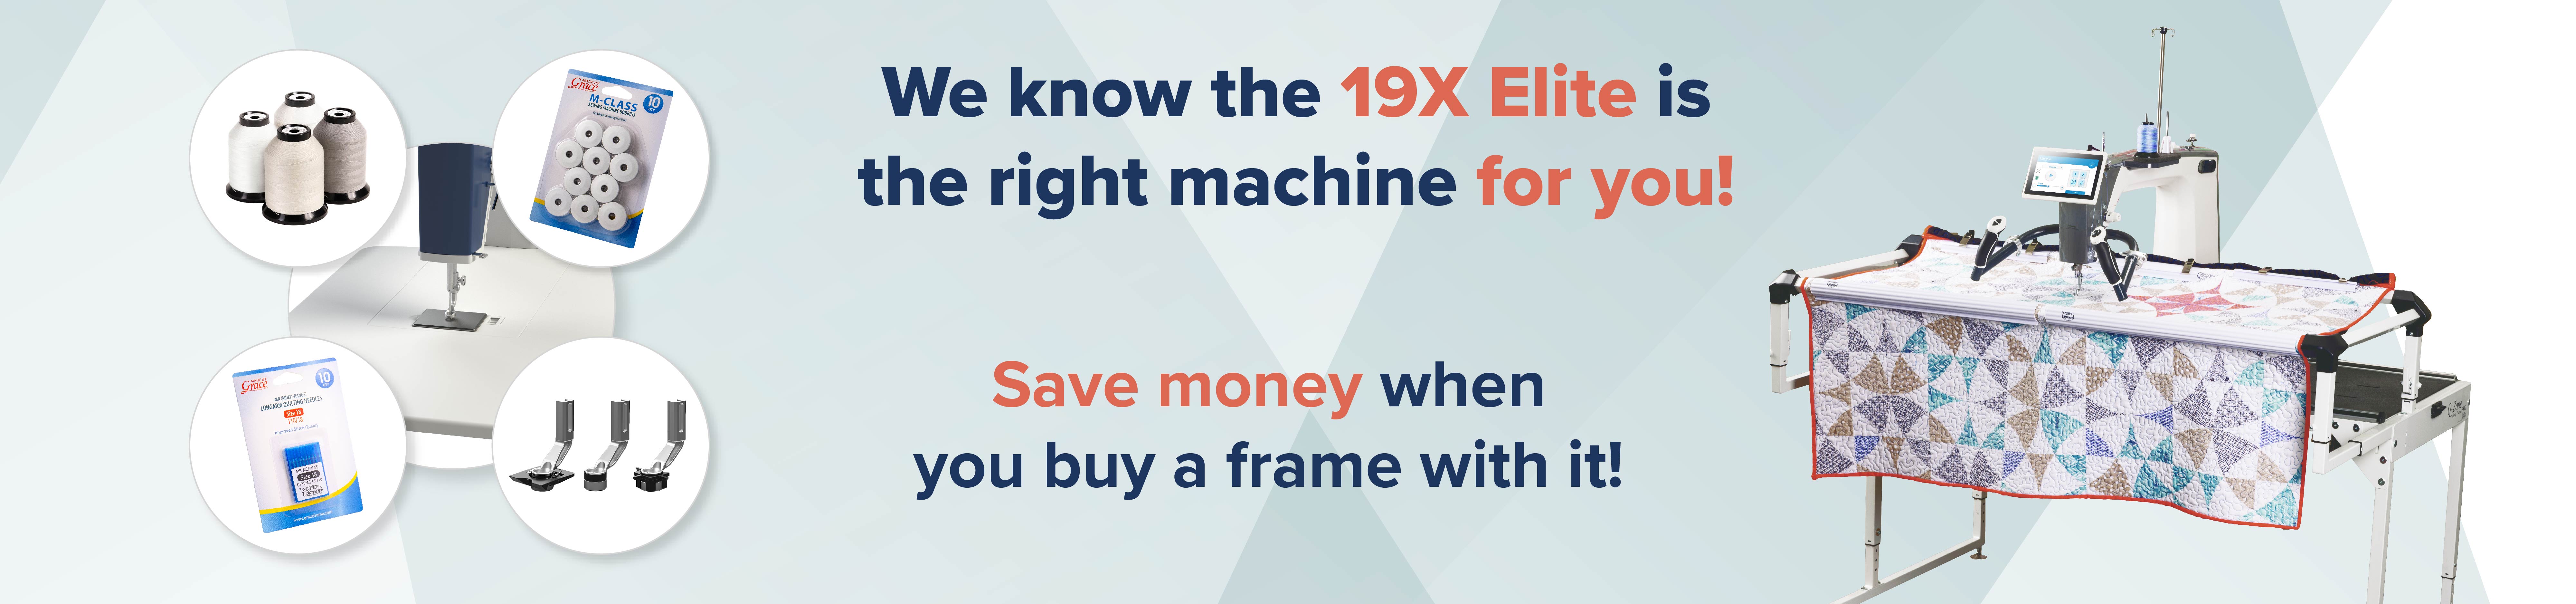 We know the 19x elite is the right machine for you. Save money when you buy a frame with it